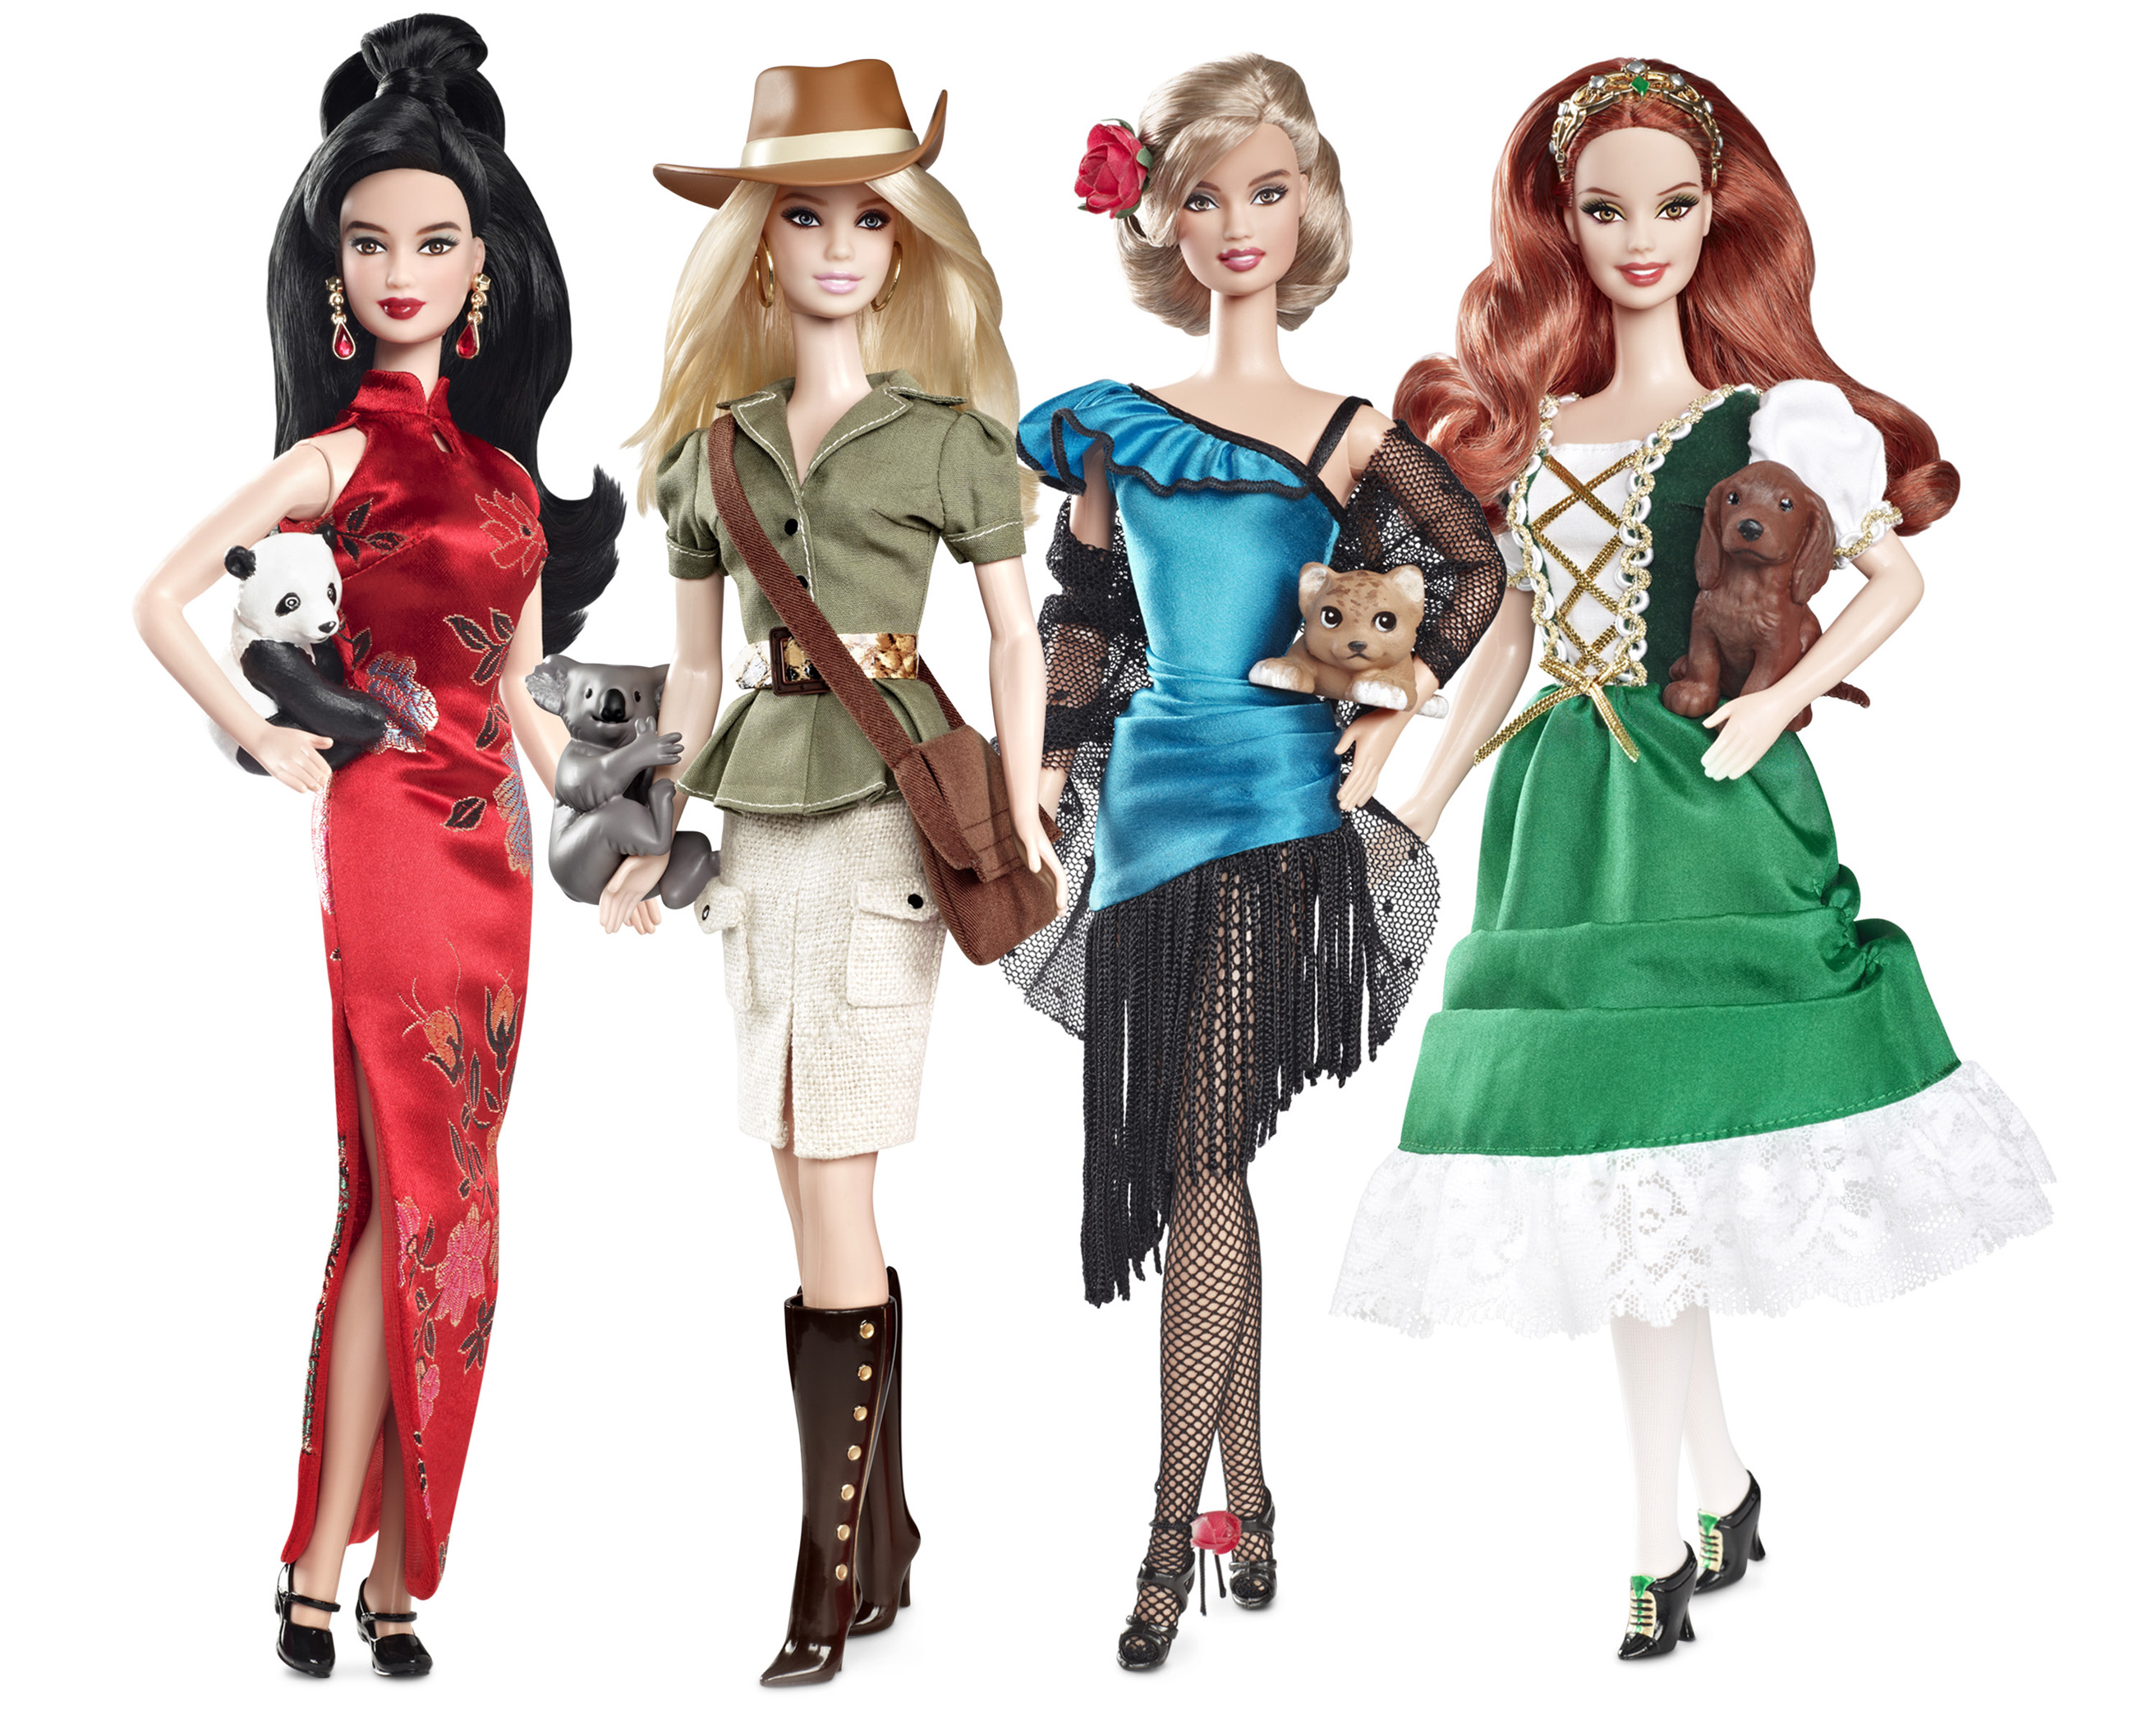 all the barbie dolls in the world